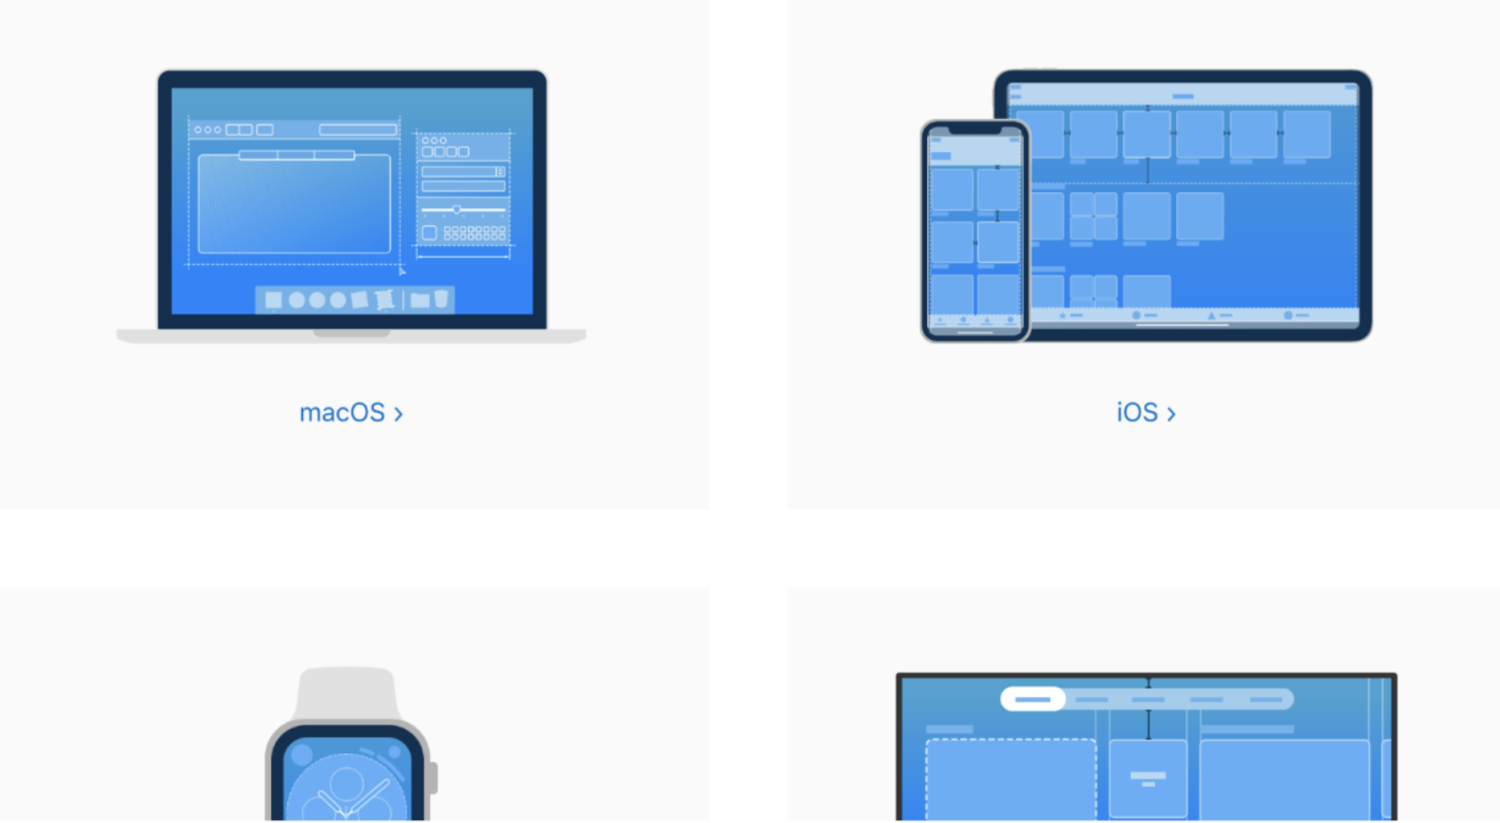 Web android and IOS design practices